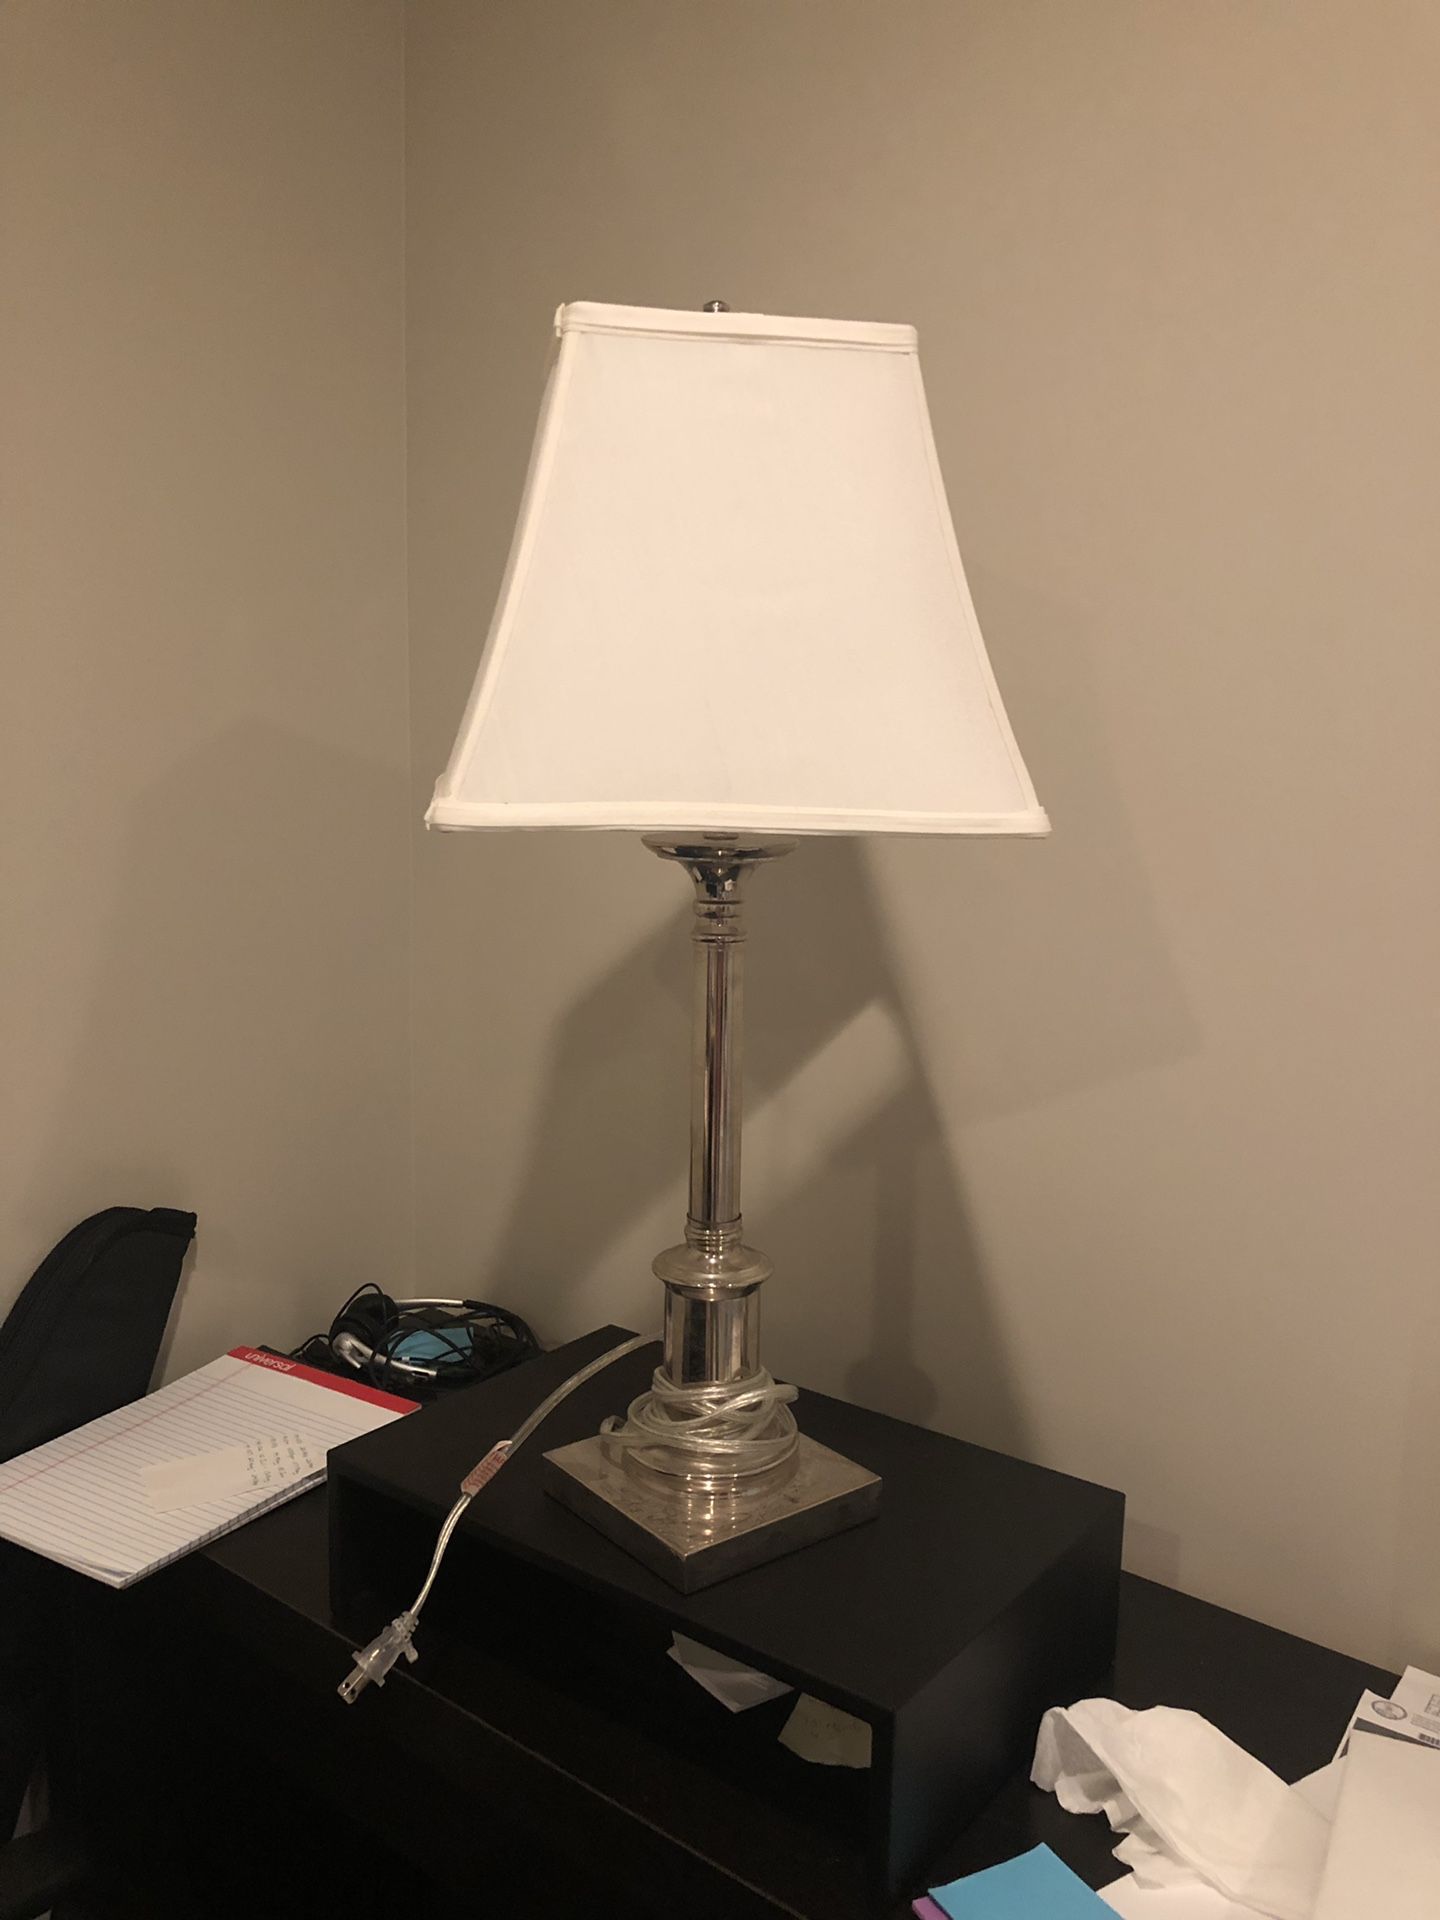 Silver lamp with white shade